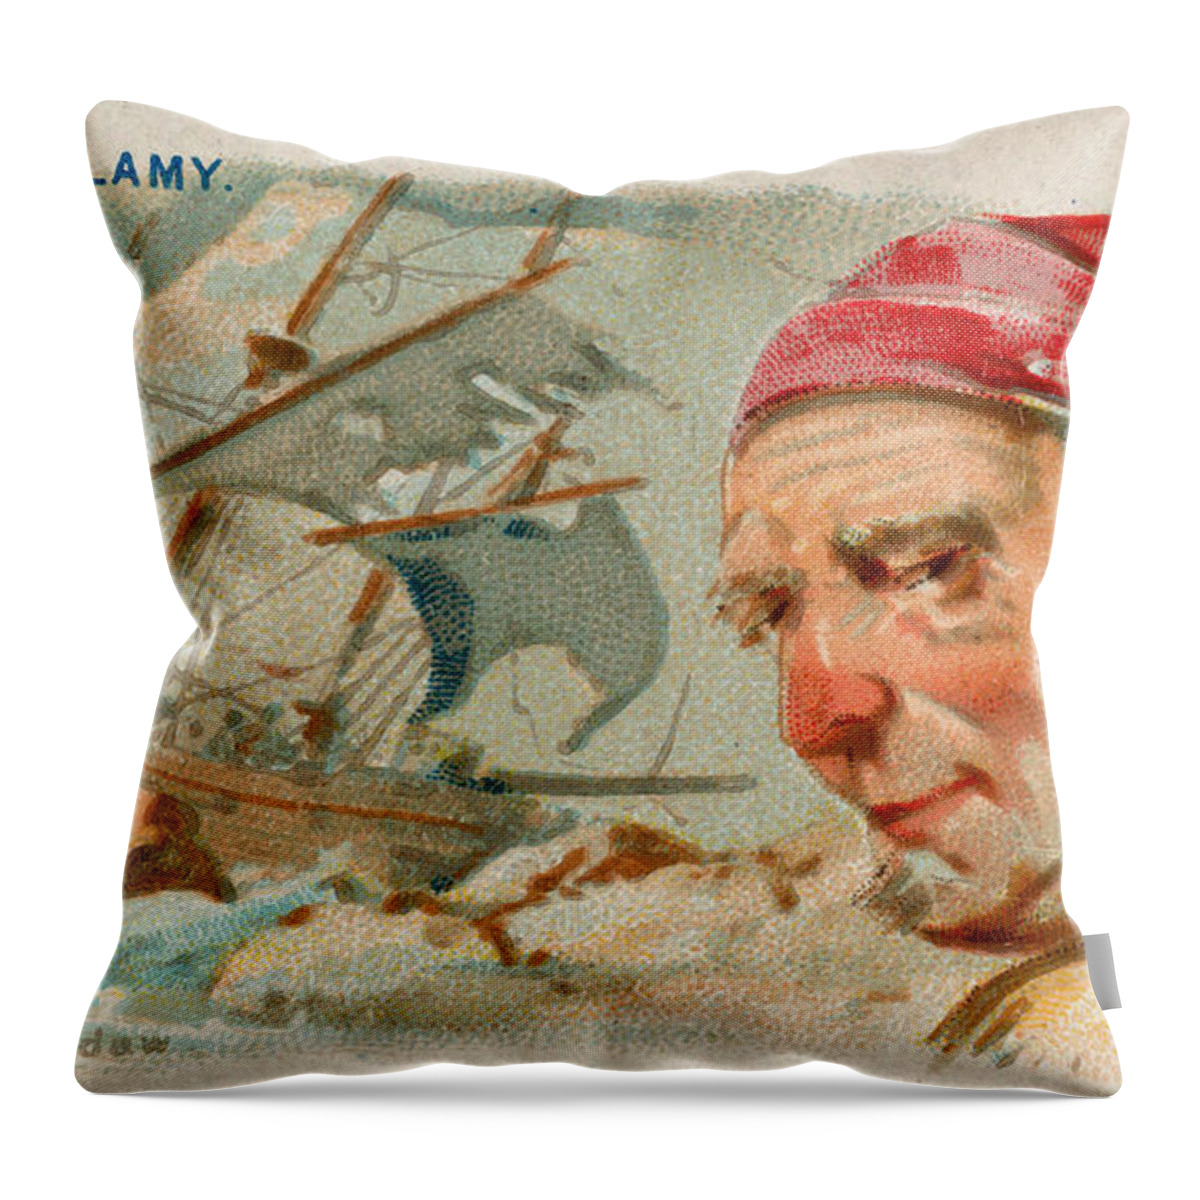 1888 Throw Pillow featuring the photograph Samuel Bellamy, English Pirate by Science Source